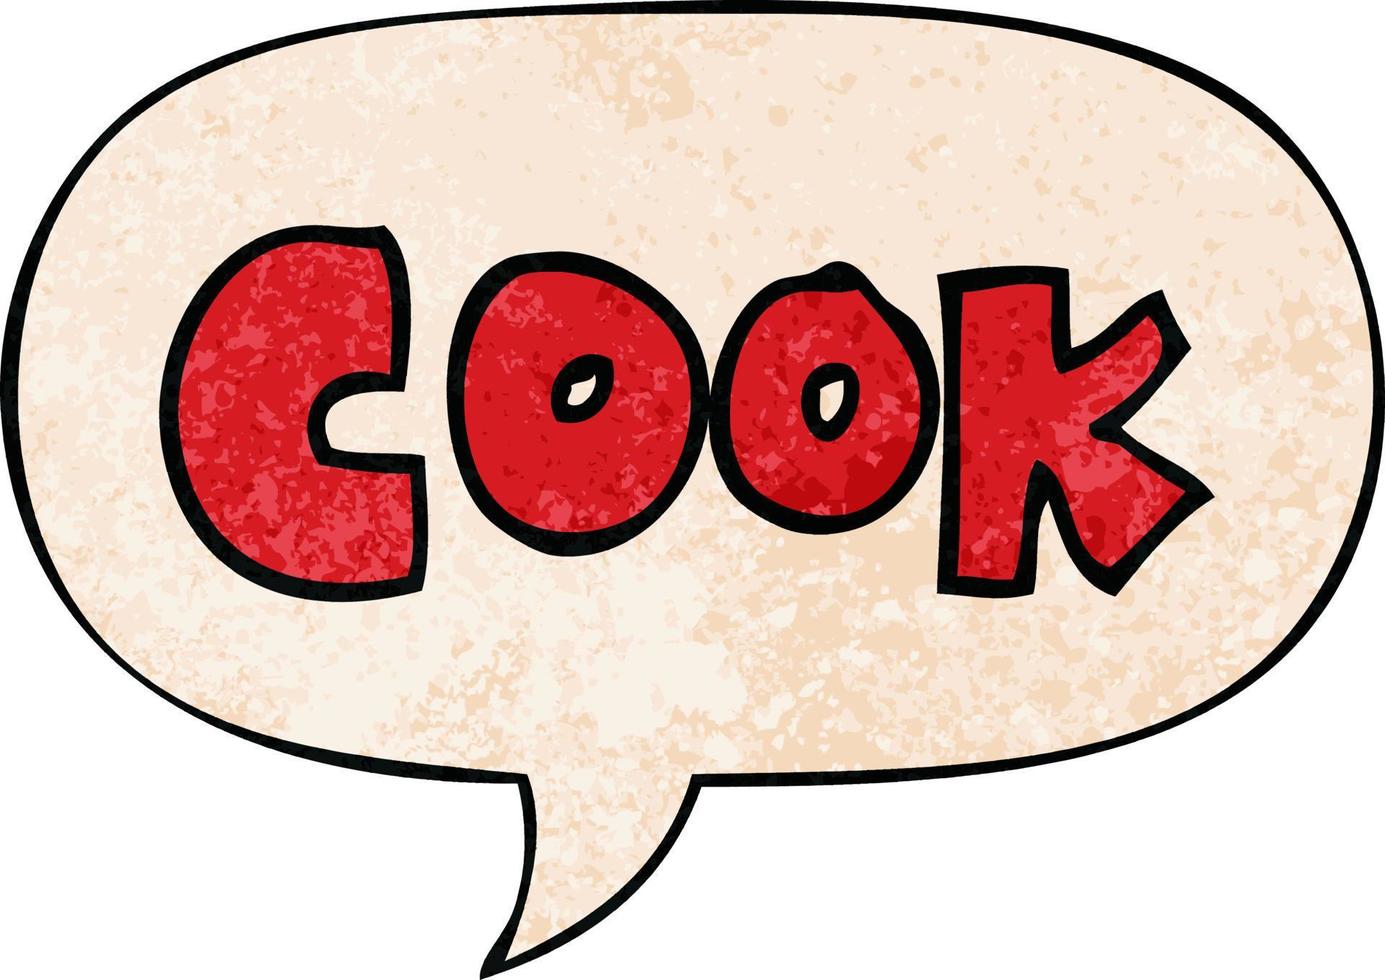 cartoon word cook and speech bubble in retro texture style vector